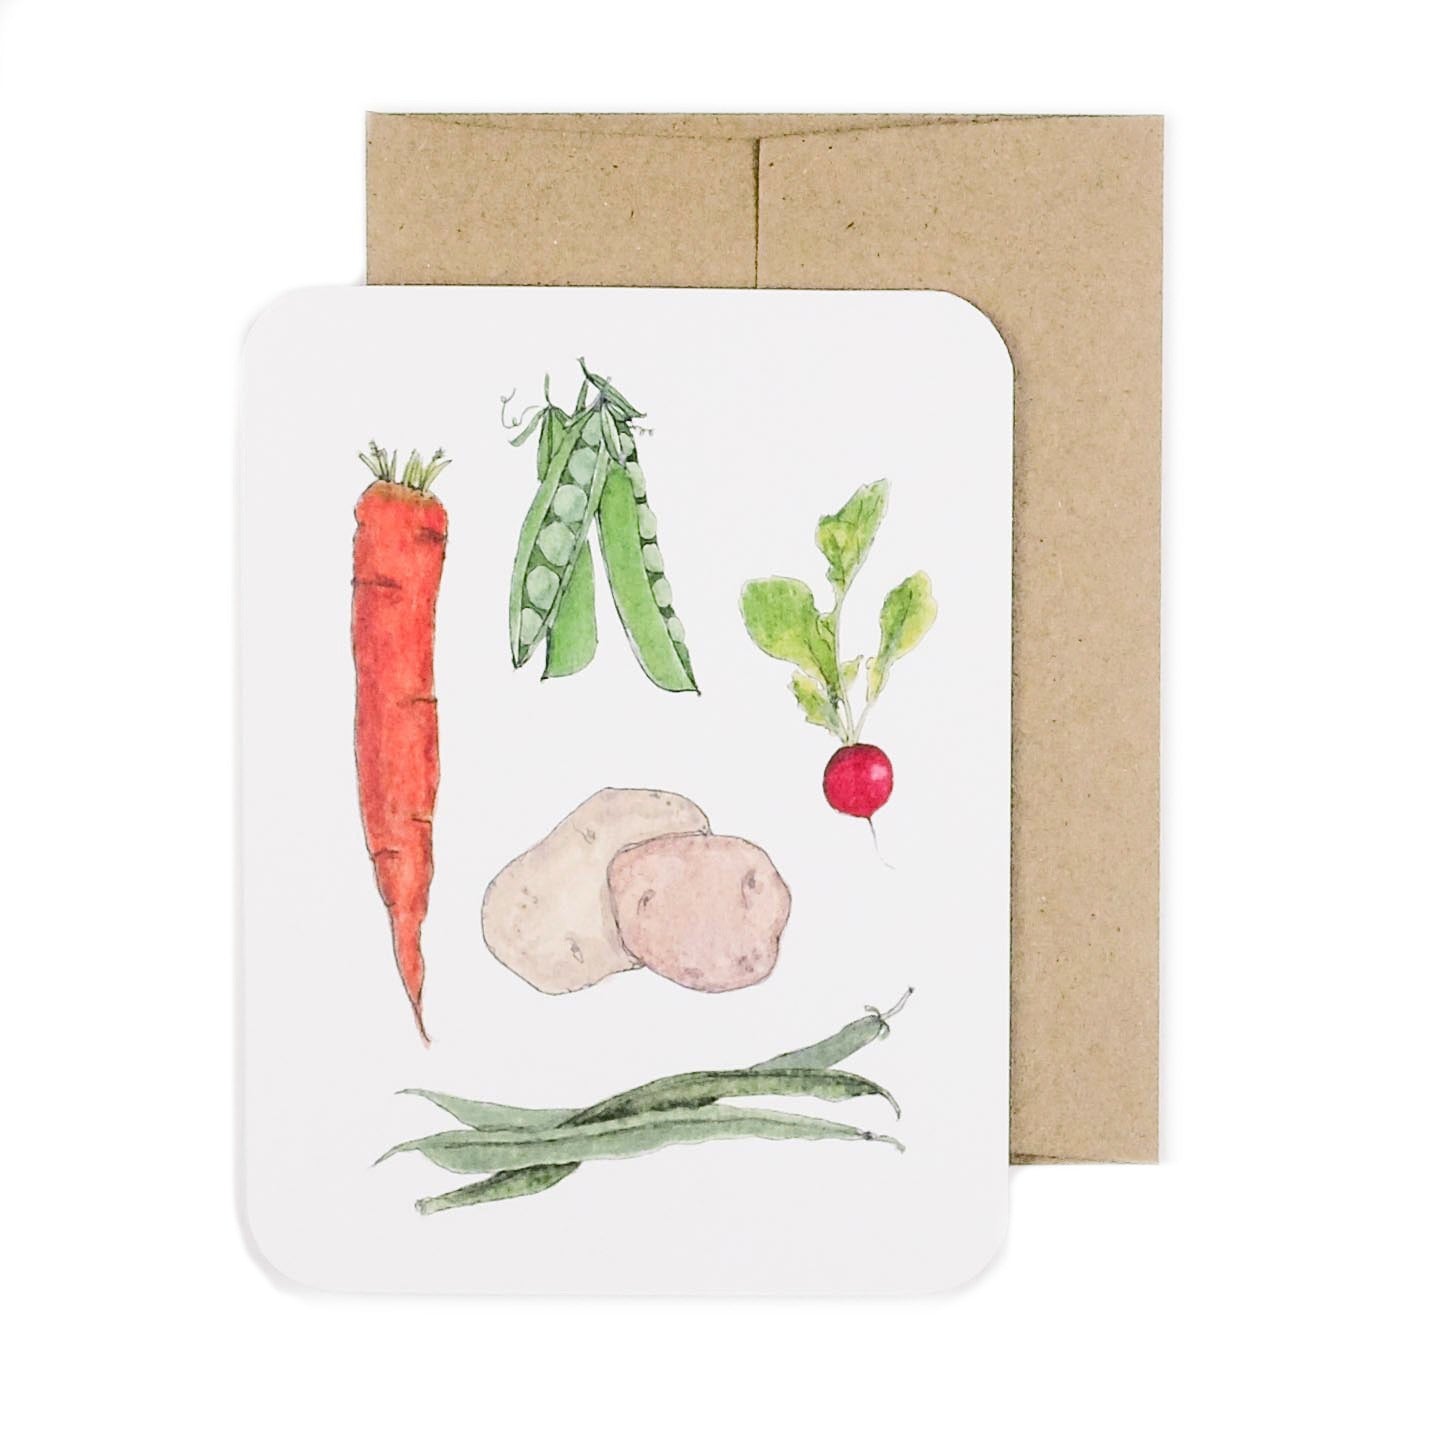 Made in Canada greeting card with drawing of a carrot, potatoe, radish, pea pods and green beans.